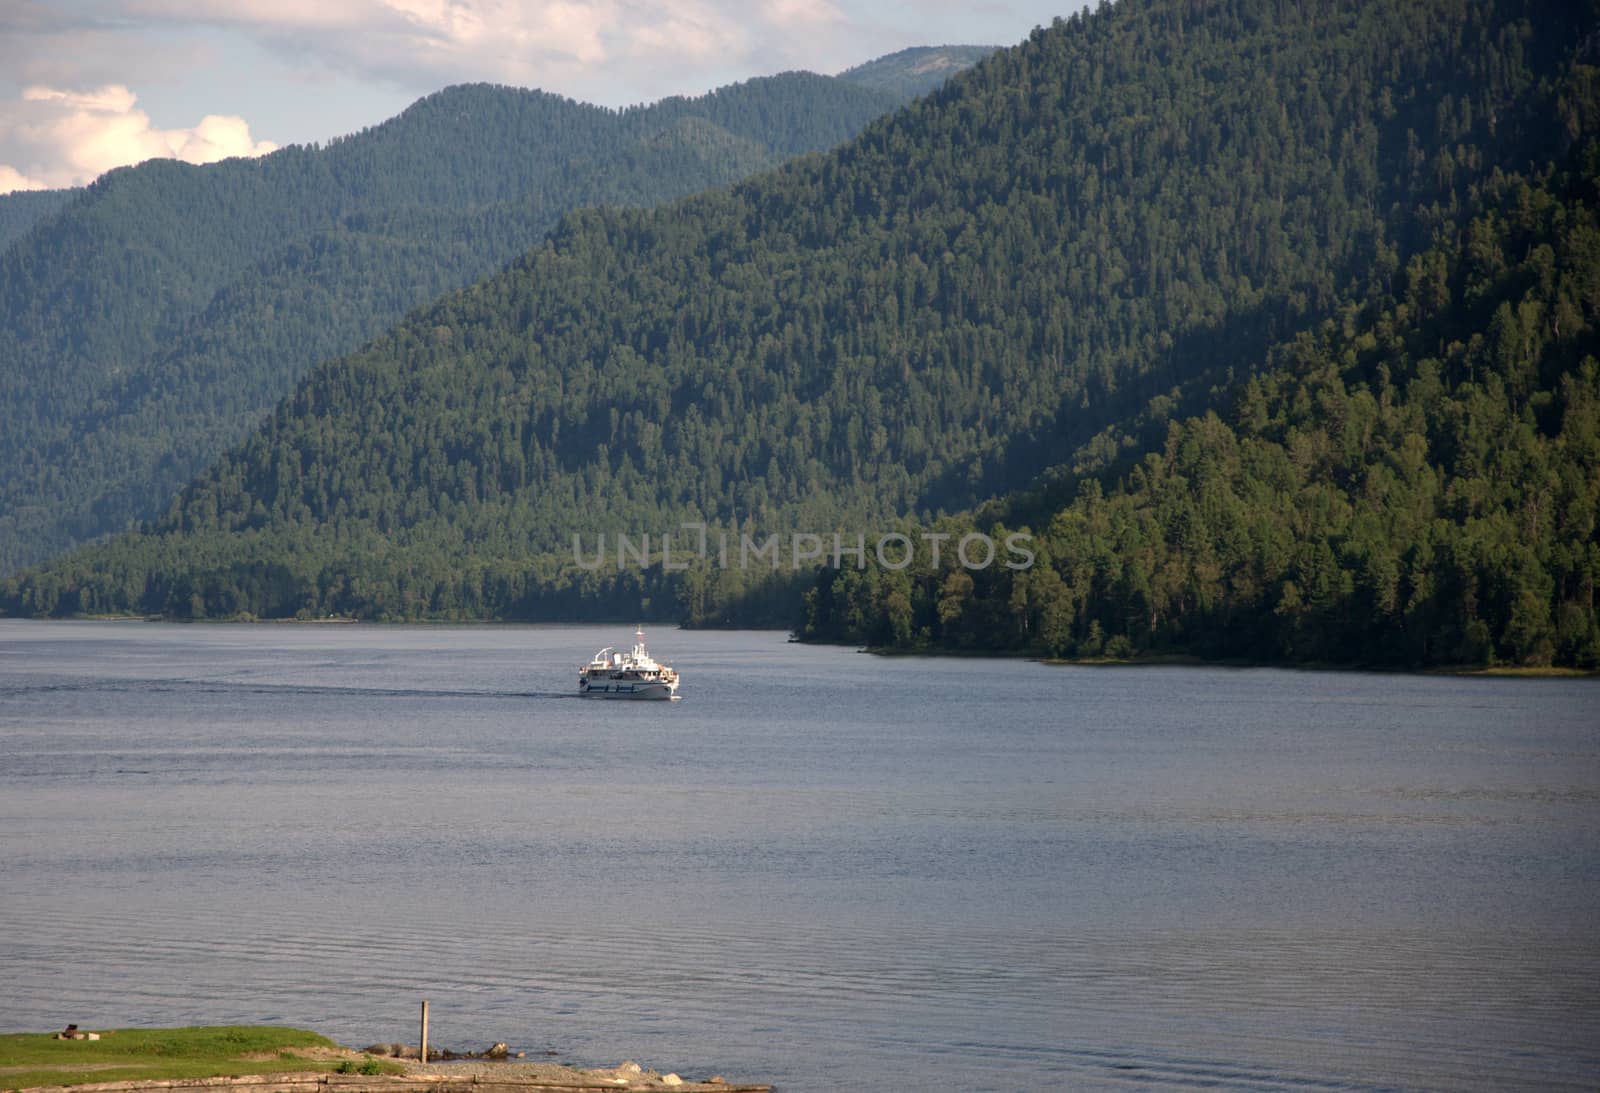 Passenger ship sailing on the lake surrounded by high mountains overgrown with coniferous forest. Teletskoye Lake, Altai, Siberia, Russia.